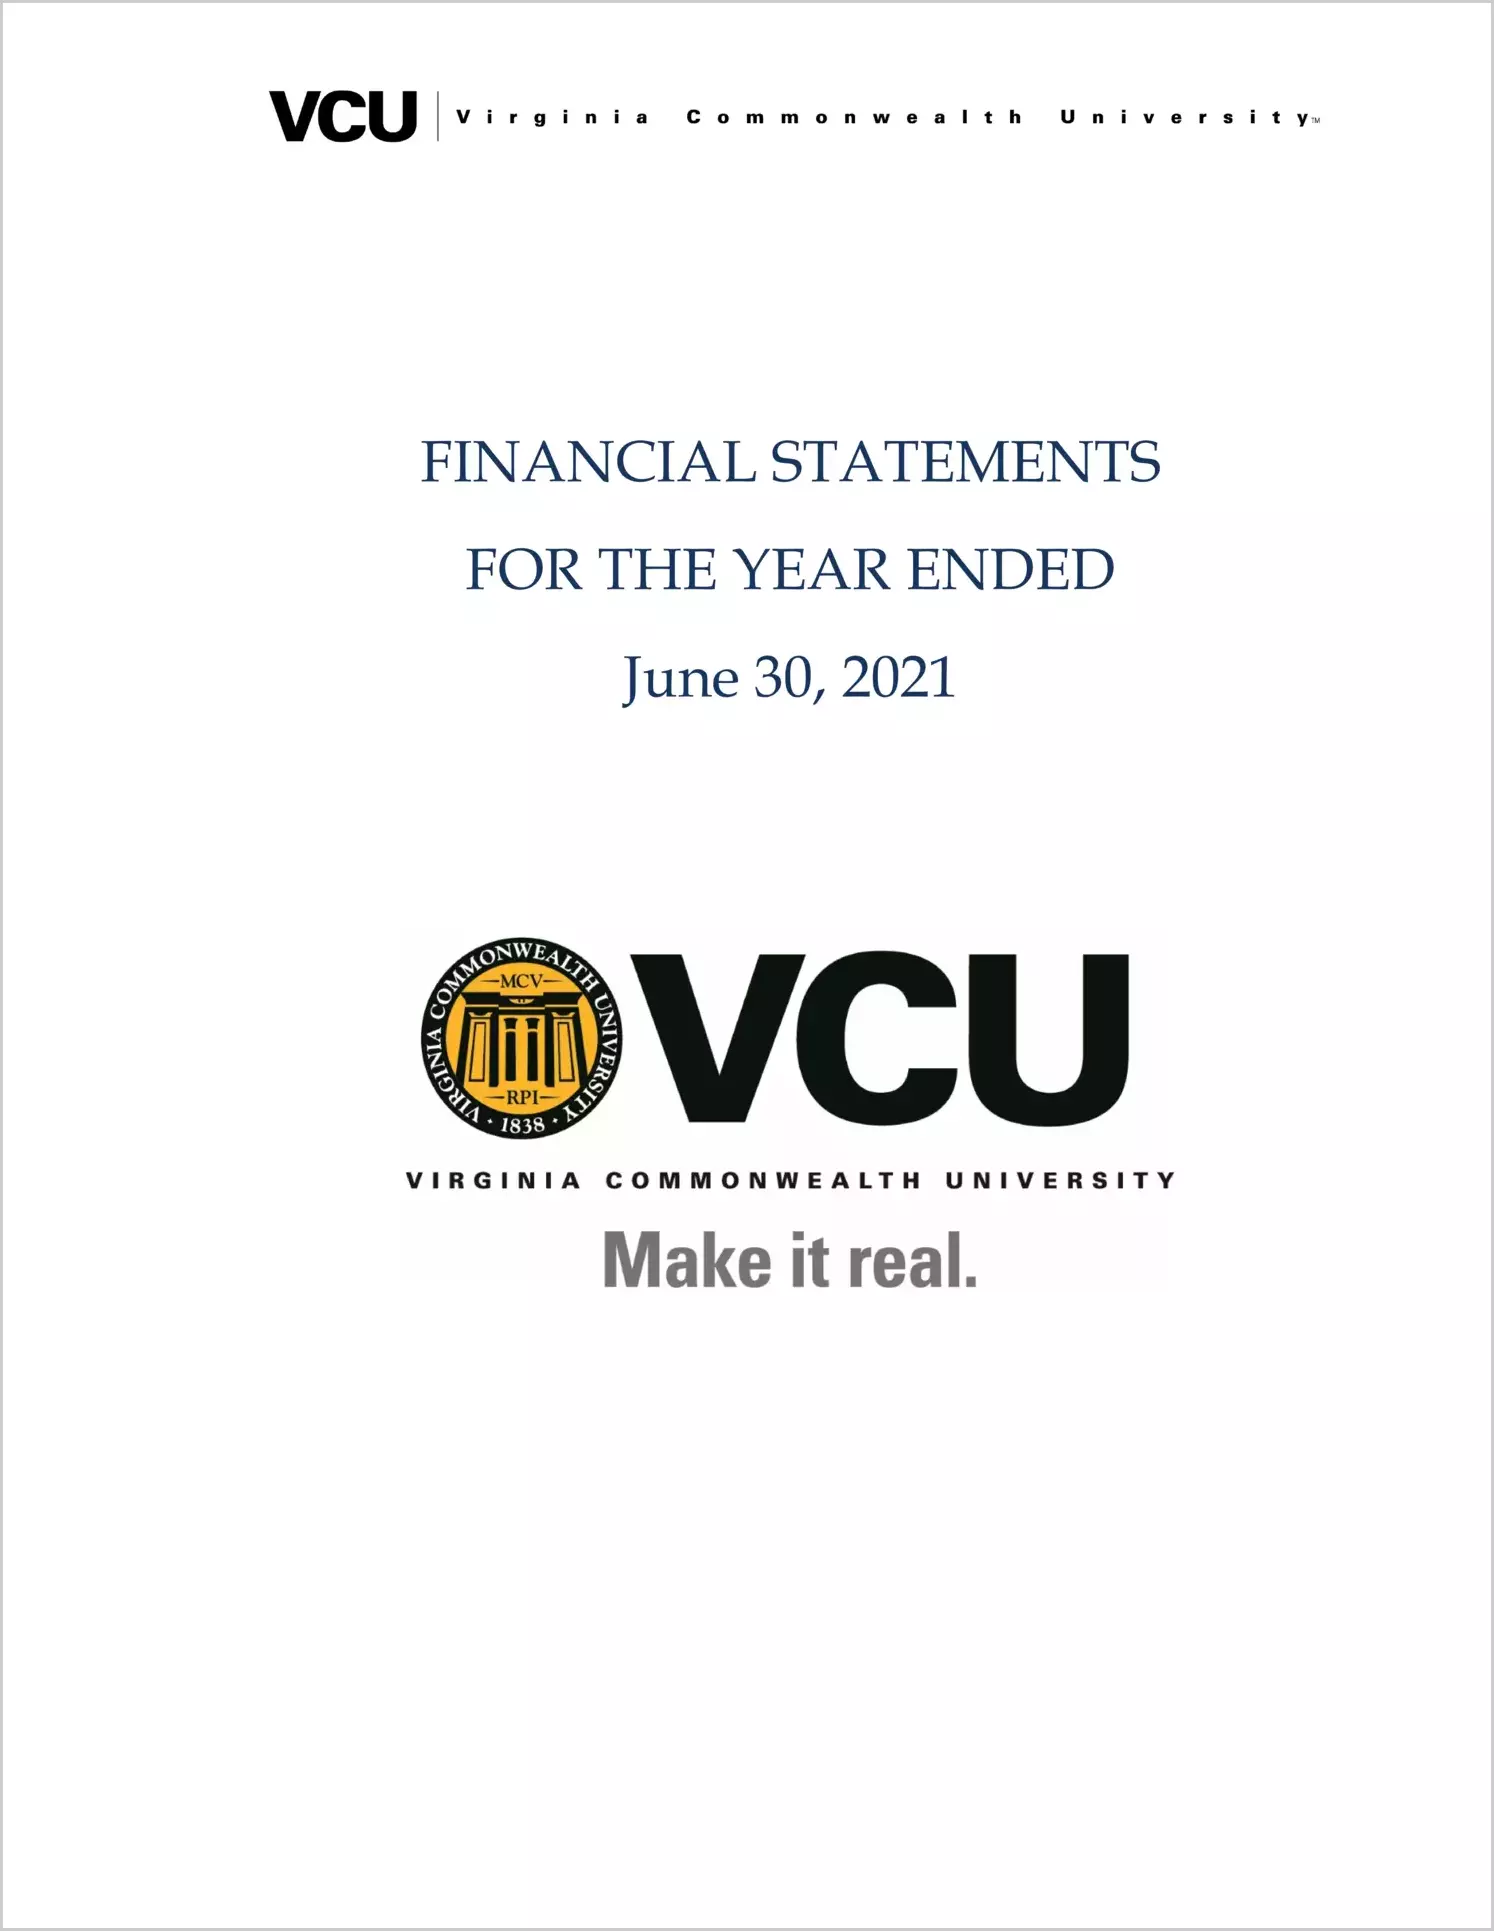 Virginia Commonwealth University Financial Statements for the year ended June 30, 2021